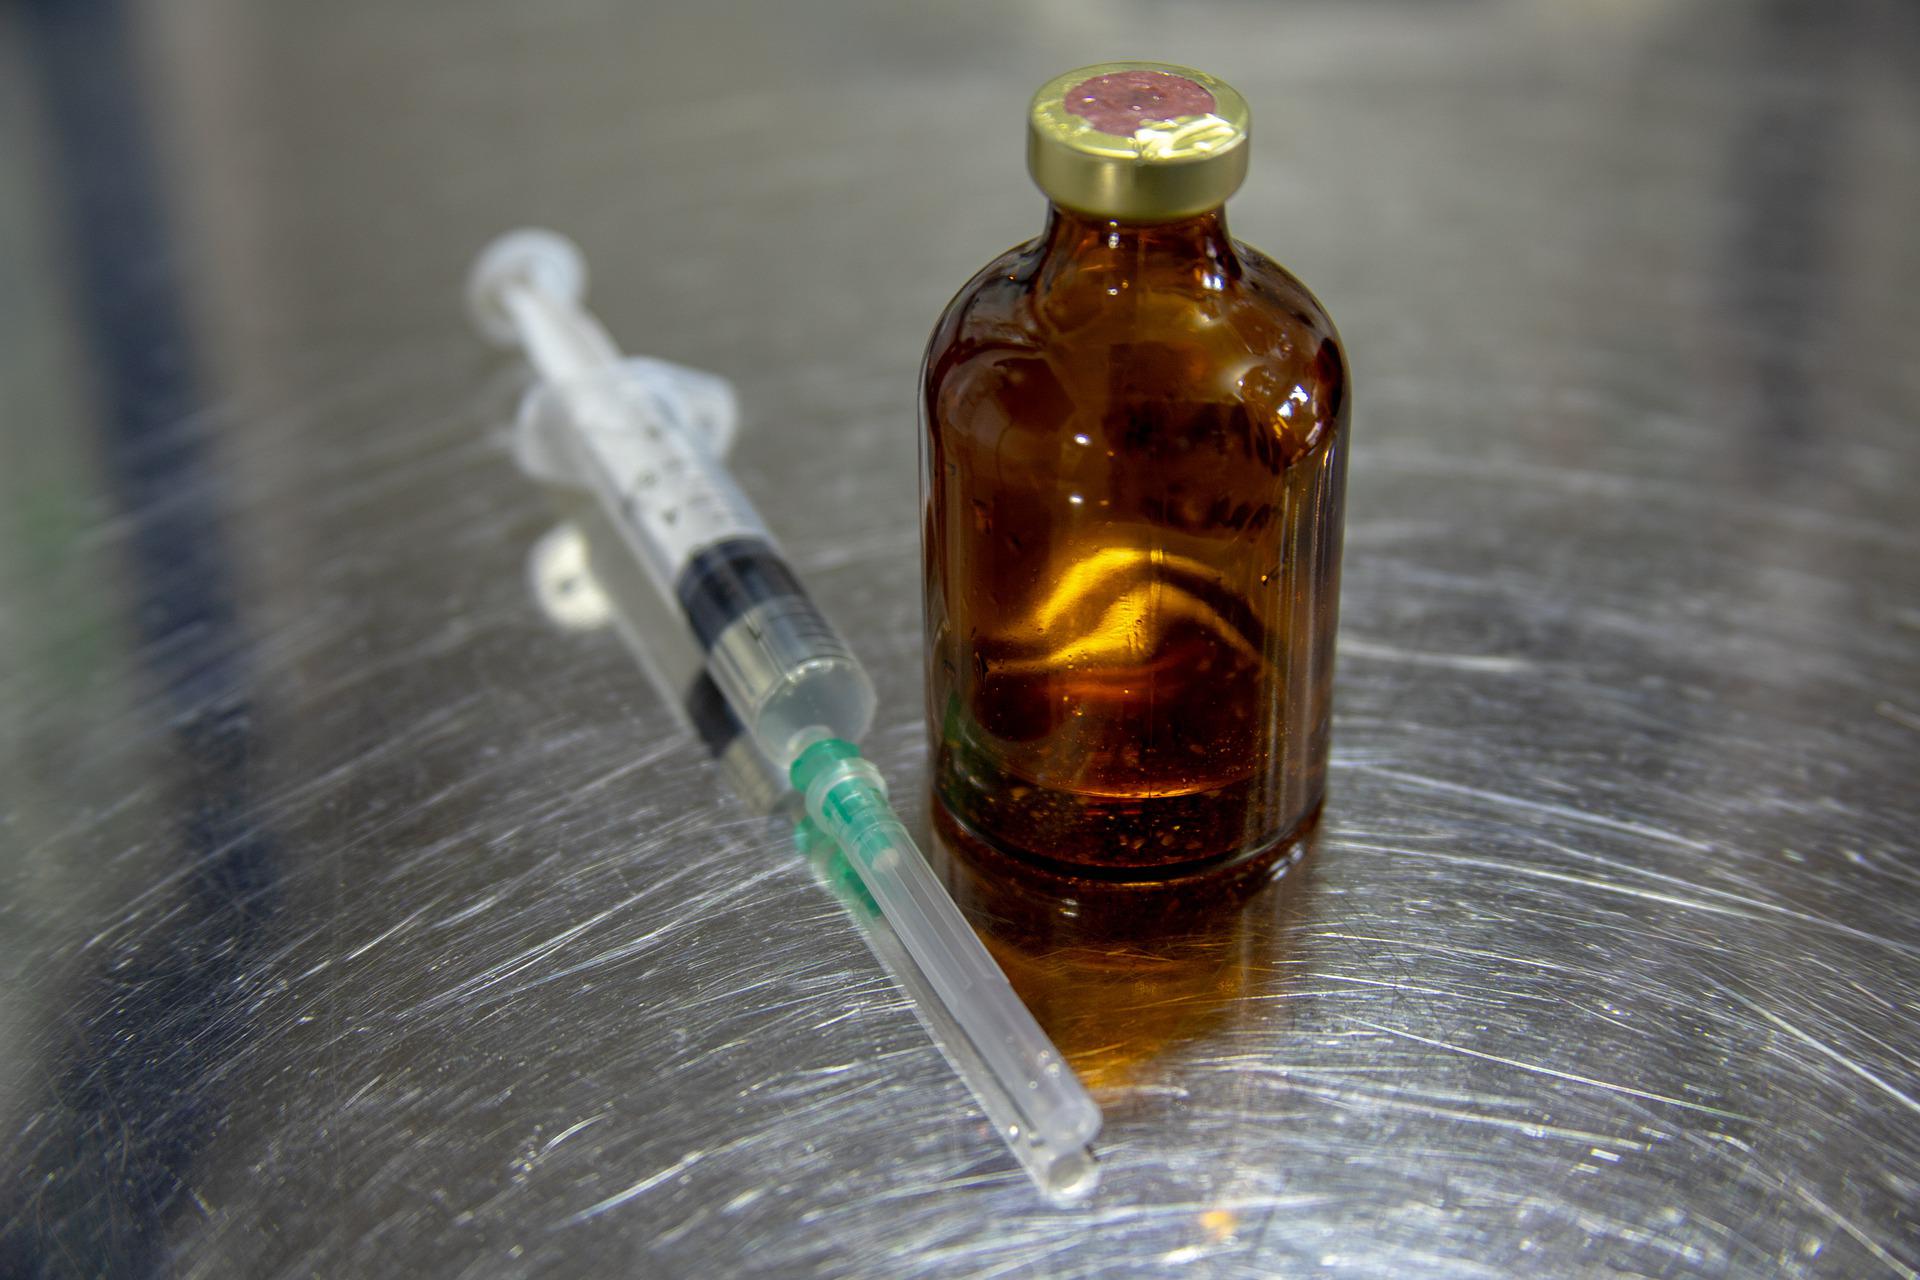 A syringe sitting beside a closed brown bottle